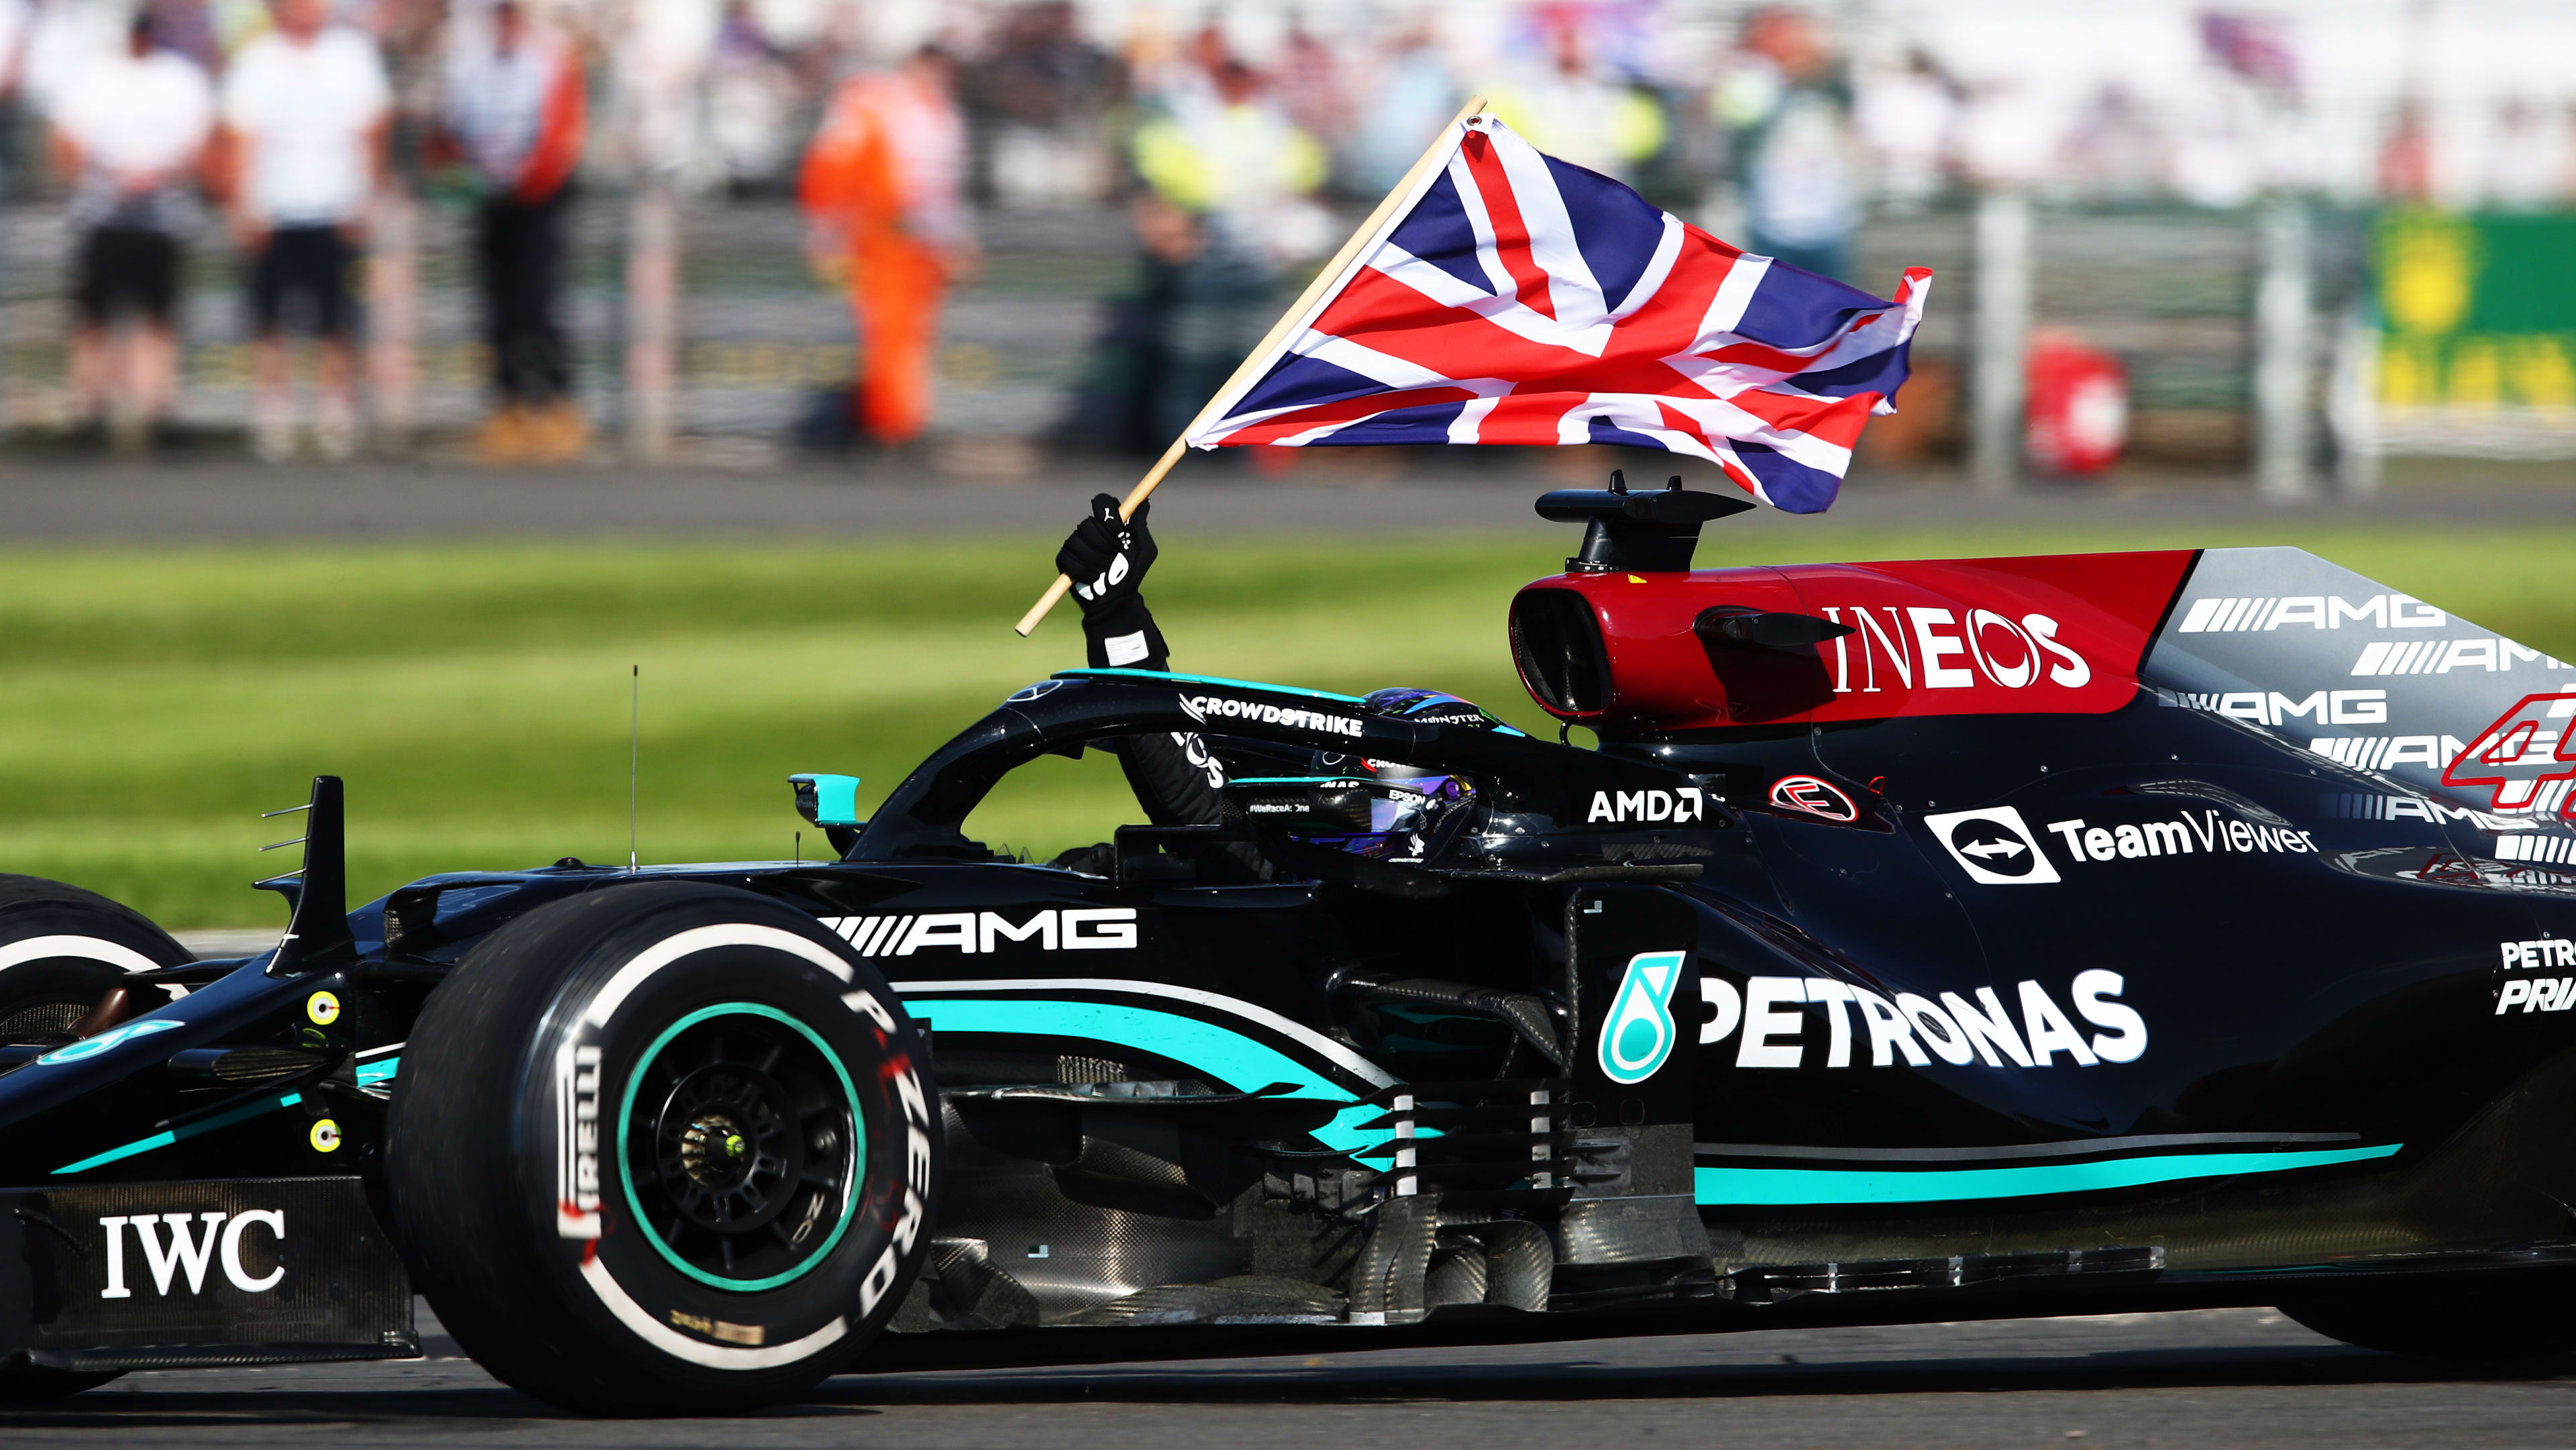 British formula one driver Lewis Hamilton is leaving Mercedes to